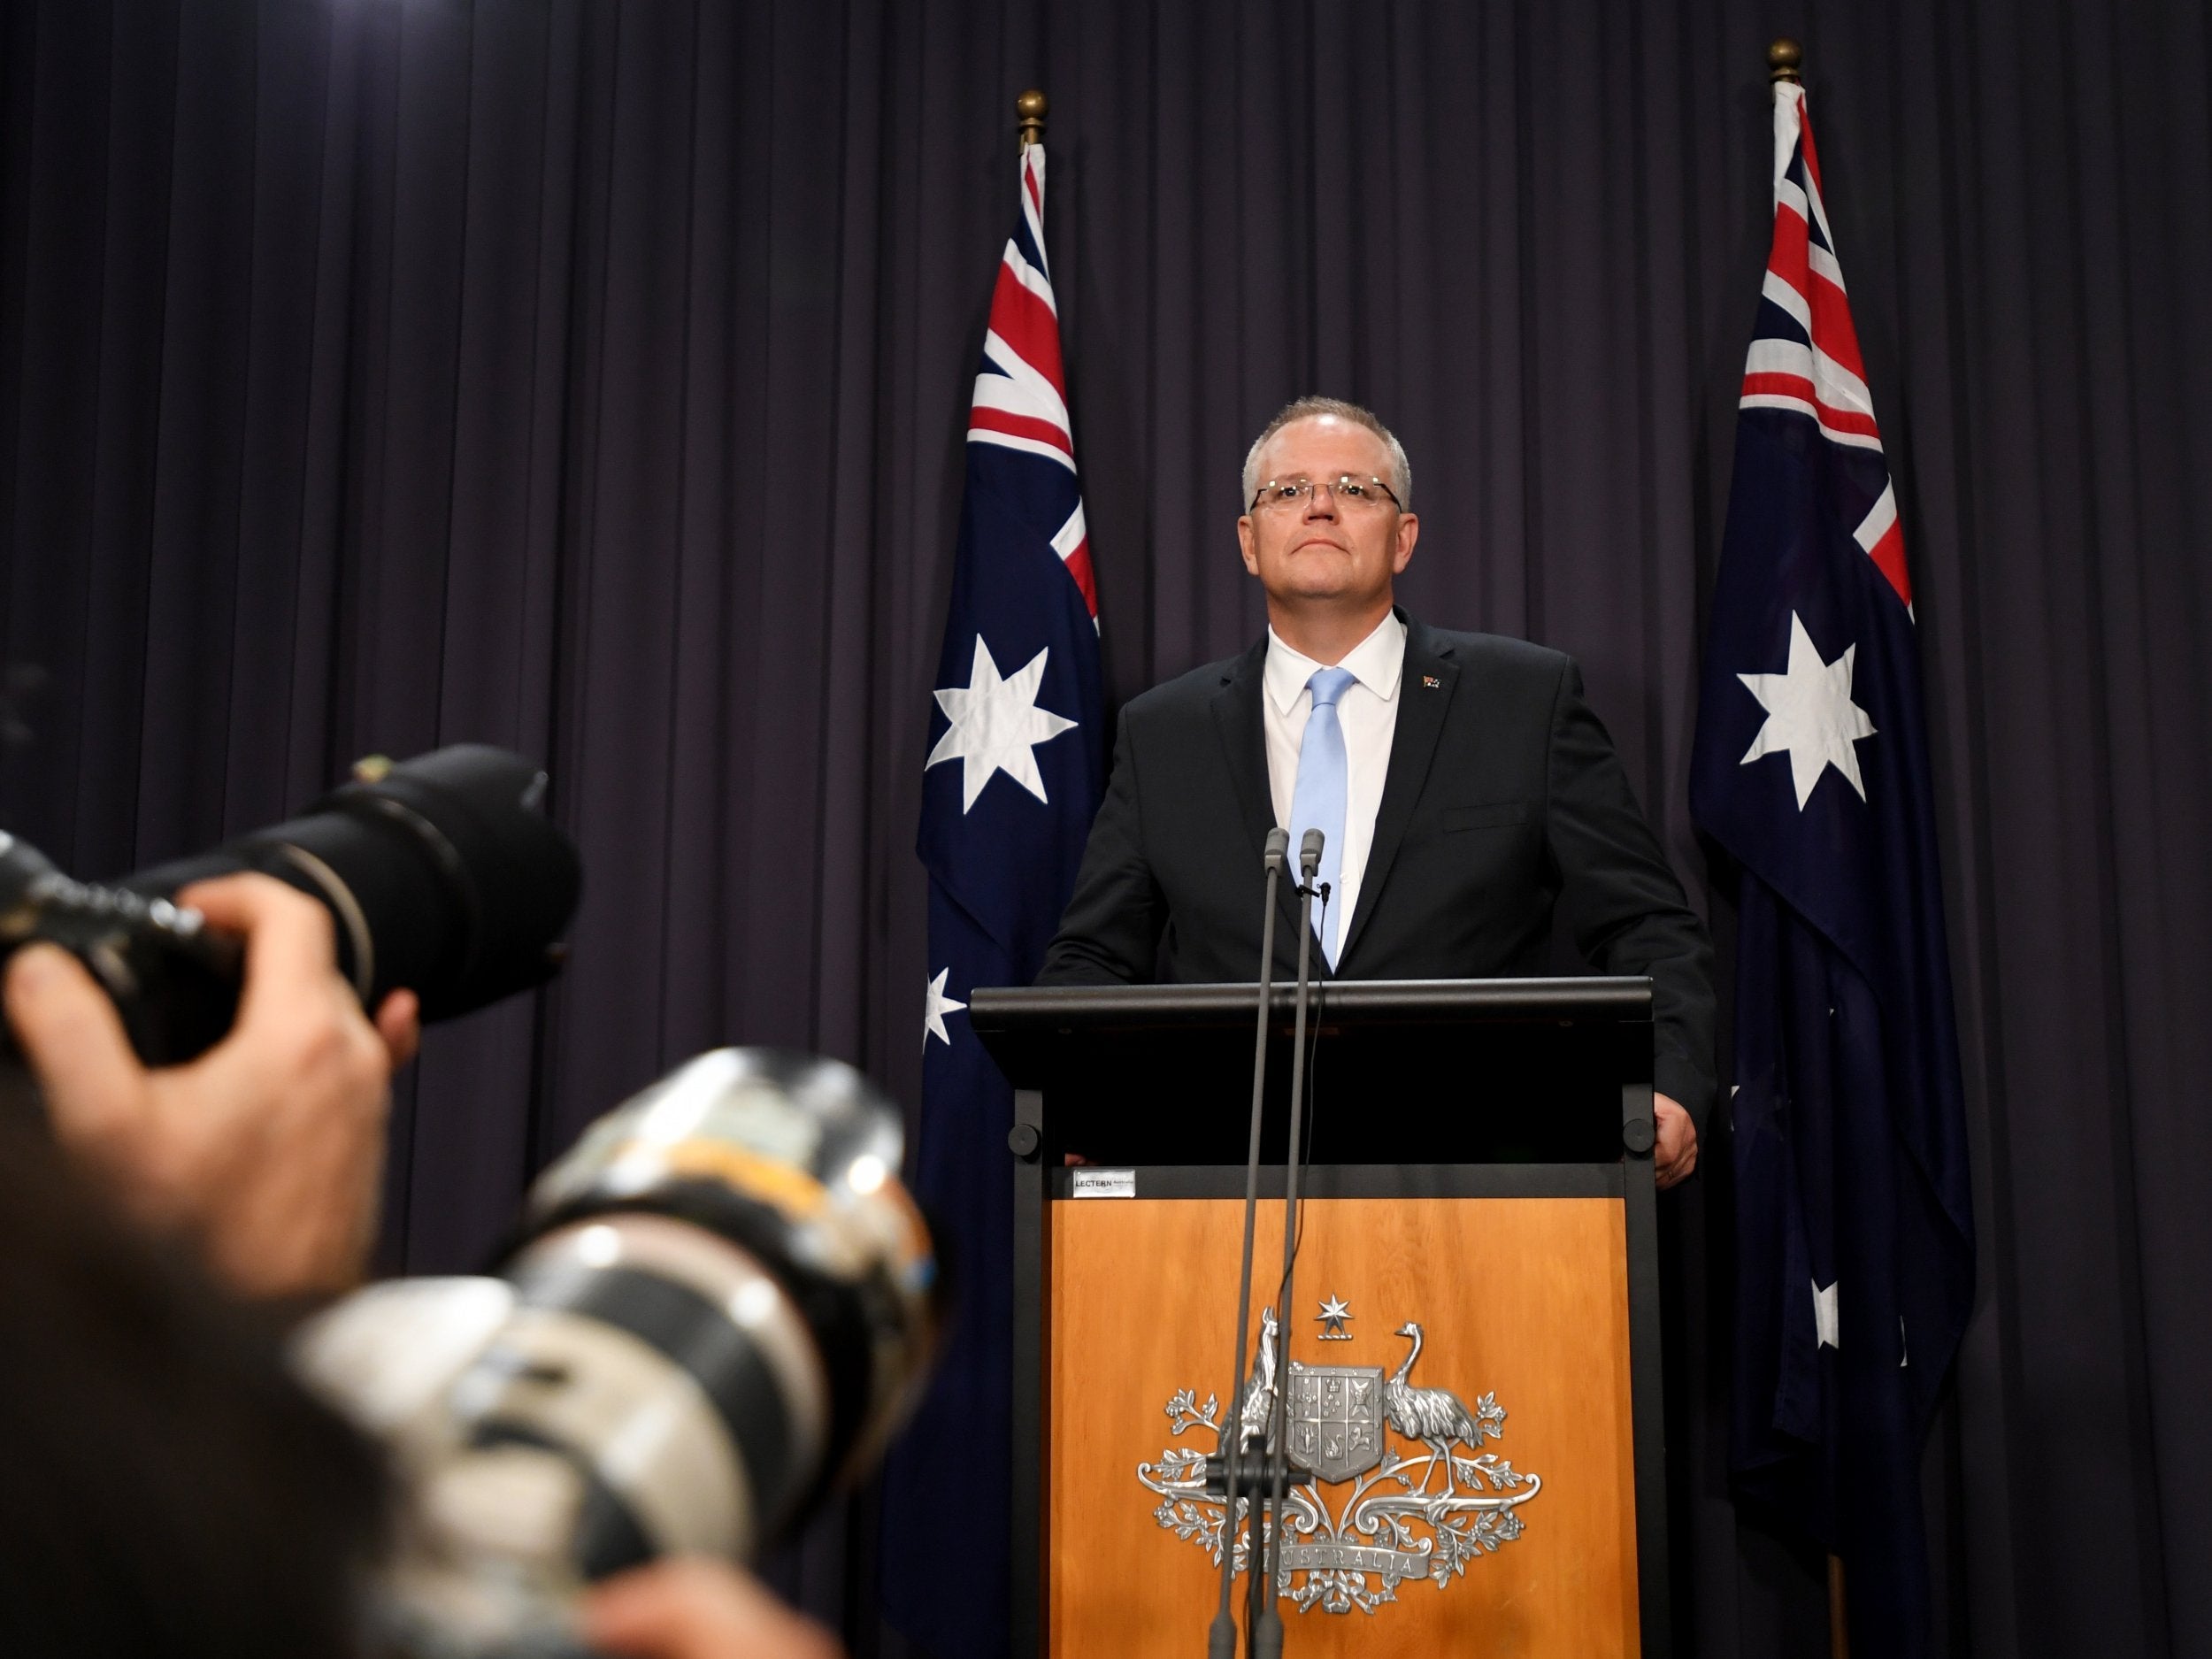 Prime Minister Scott Morrison holds a press conference after the passing of the Medivac Bill in the House of Representatives